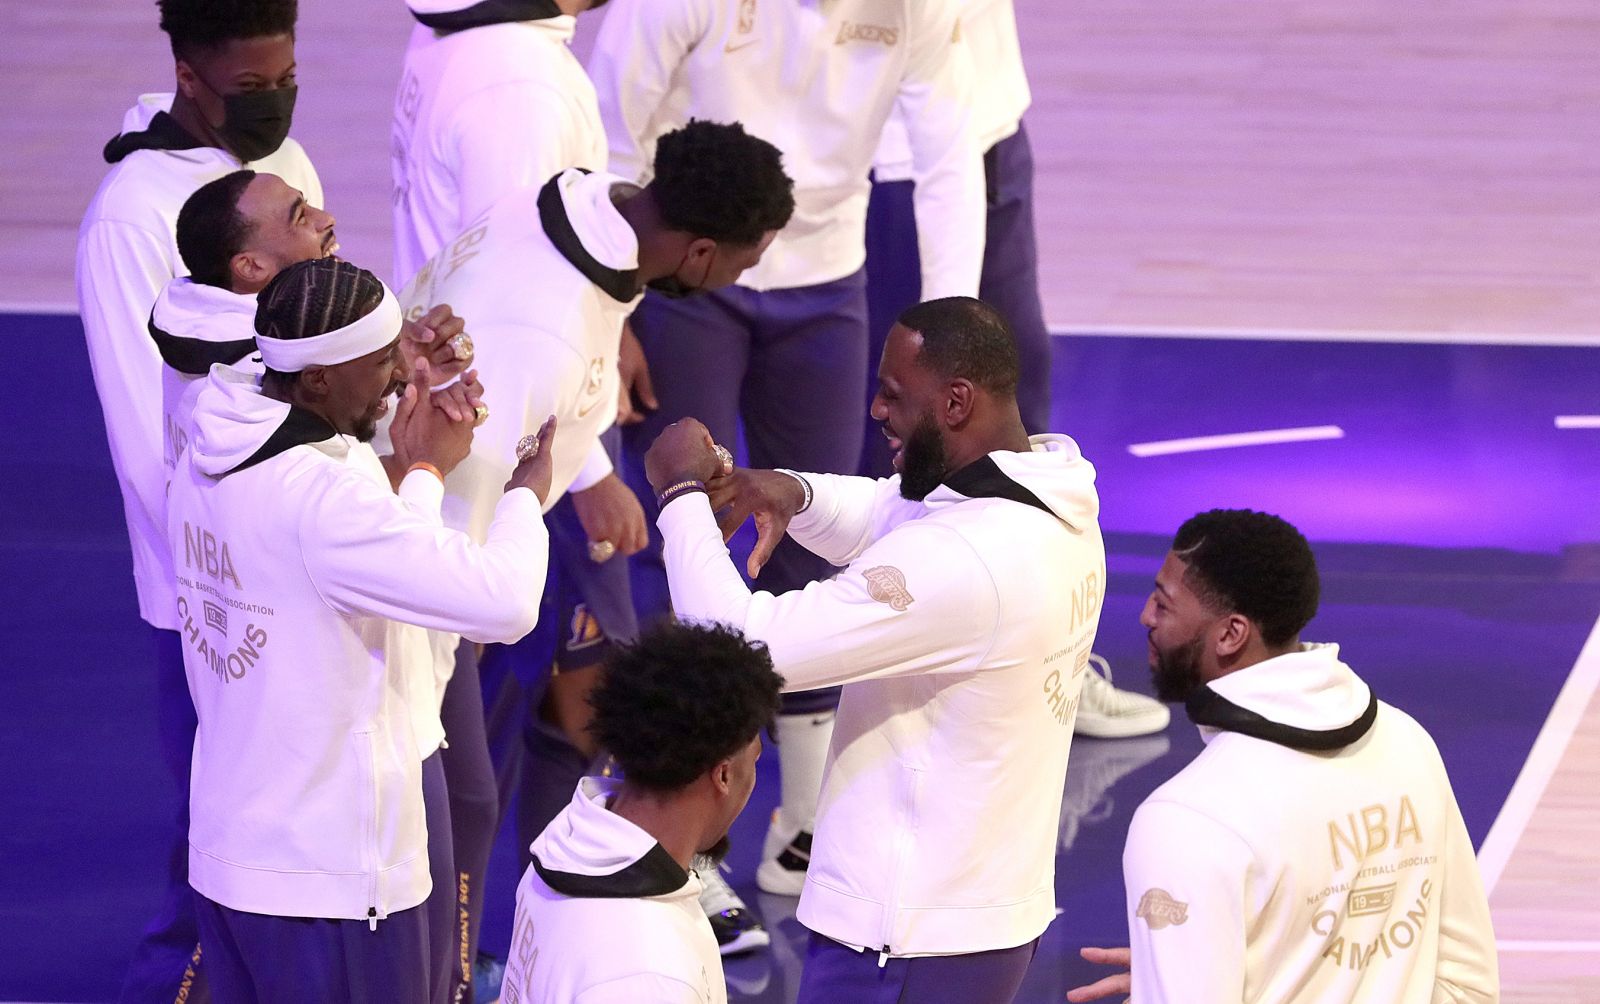 epa08900518 Los Angeles Lakers forward LeBron James (2-R) reacts after receiving his championship ring during a pre-game ceremony before the Lakers played the Los Angeles Clippers in their NBA game at the Staples Center in Los Angeles, California, USA, 22 December 2020.  EPA/ROBERT GAUTHIER / LOS ANGELES TIMES SHUTTERSTOCK OUT  EDITORIAL USE ONLY/NO SALES/NO ARCHIVES